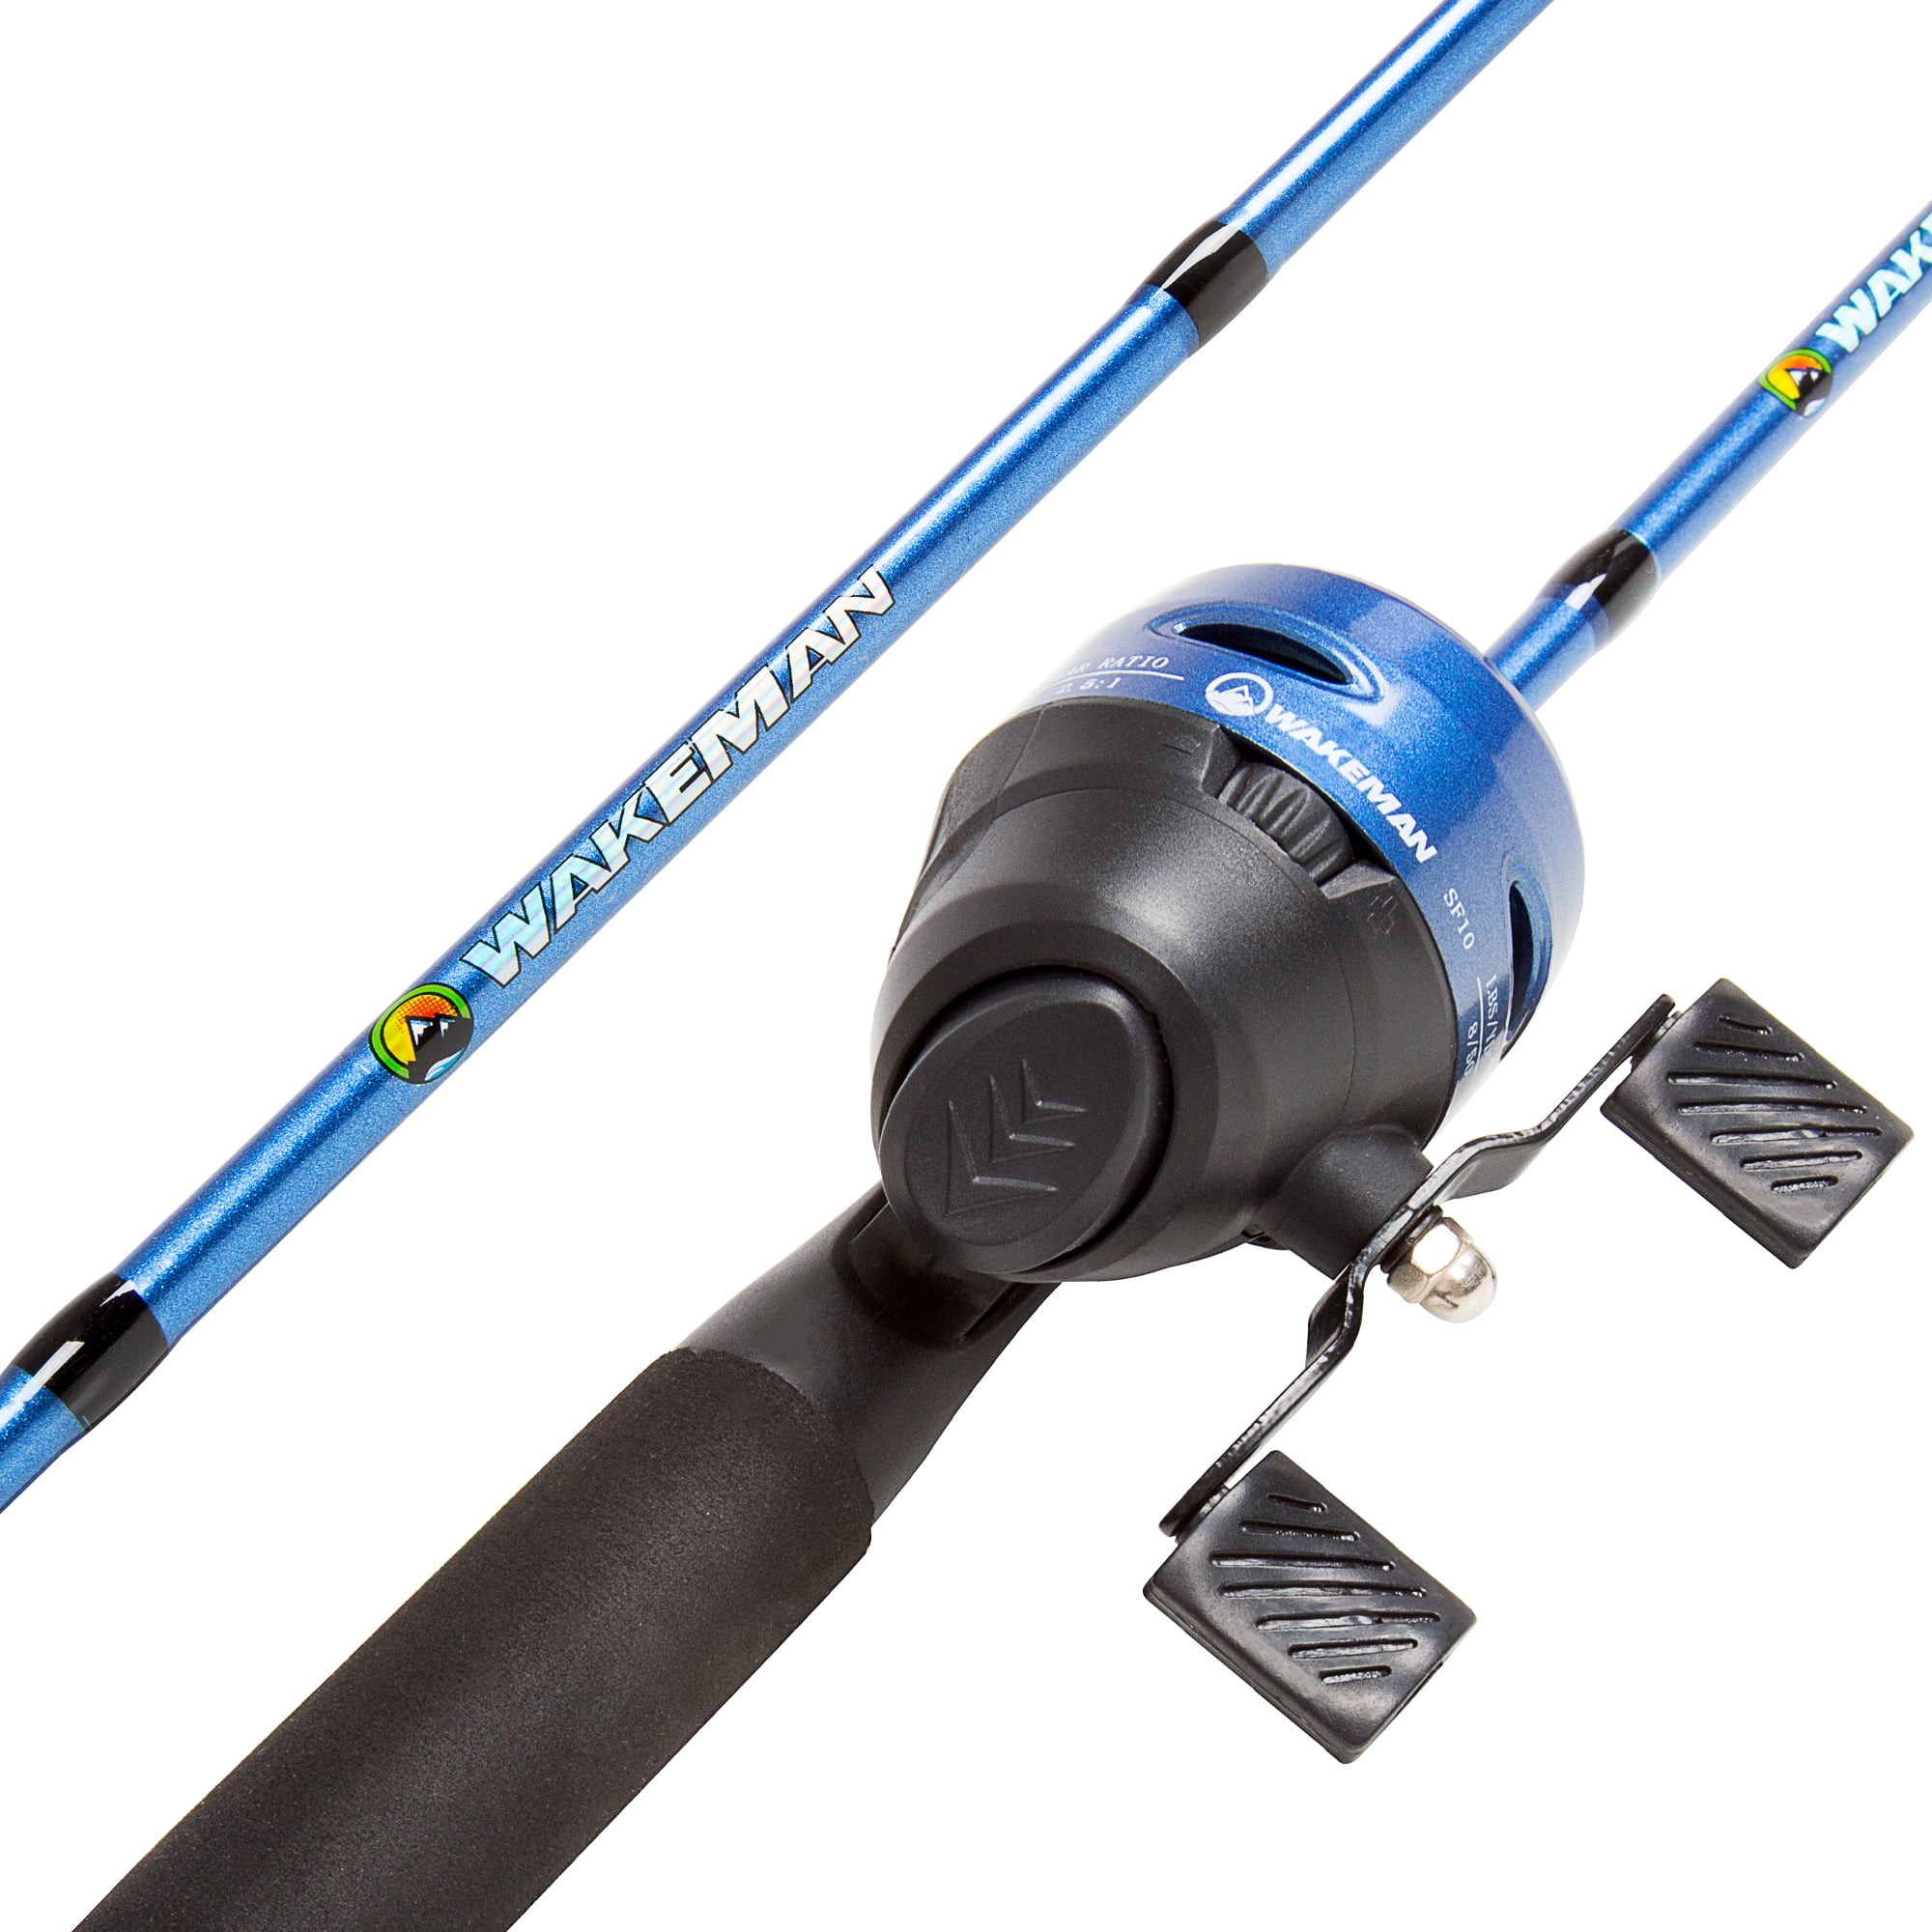 Fishing Pole – 64-Inch Fiberglass and Stainless Steel Rod and Pre